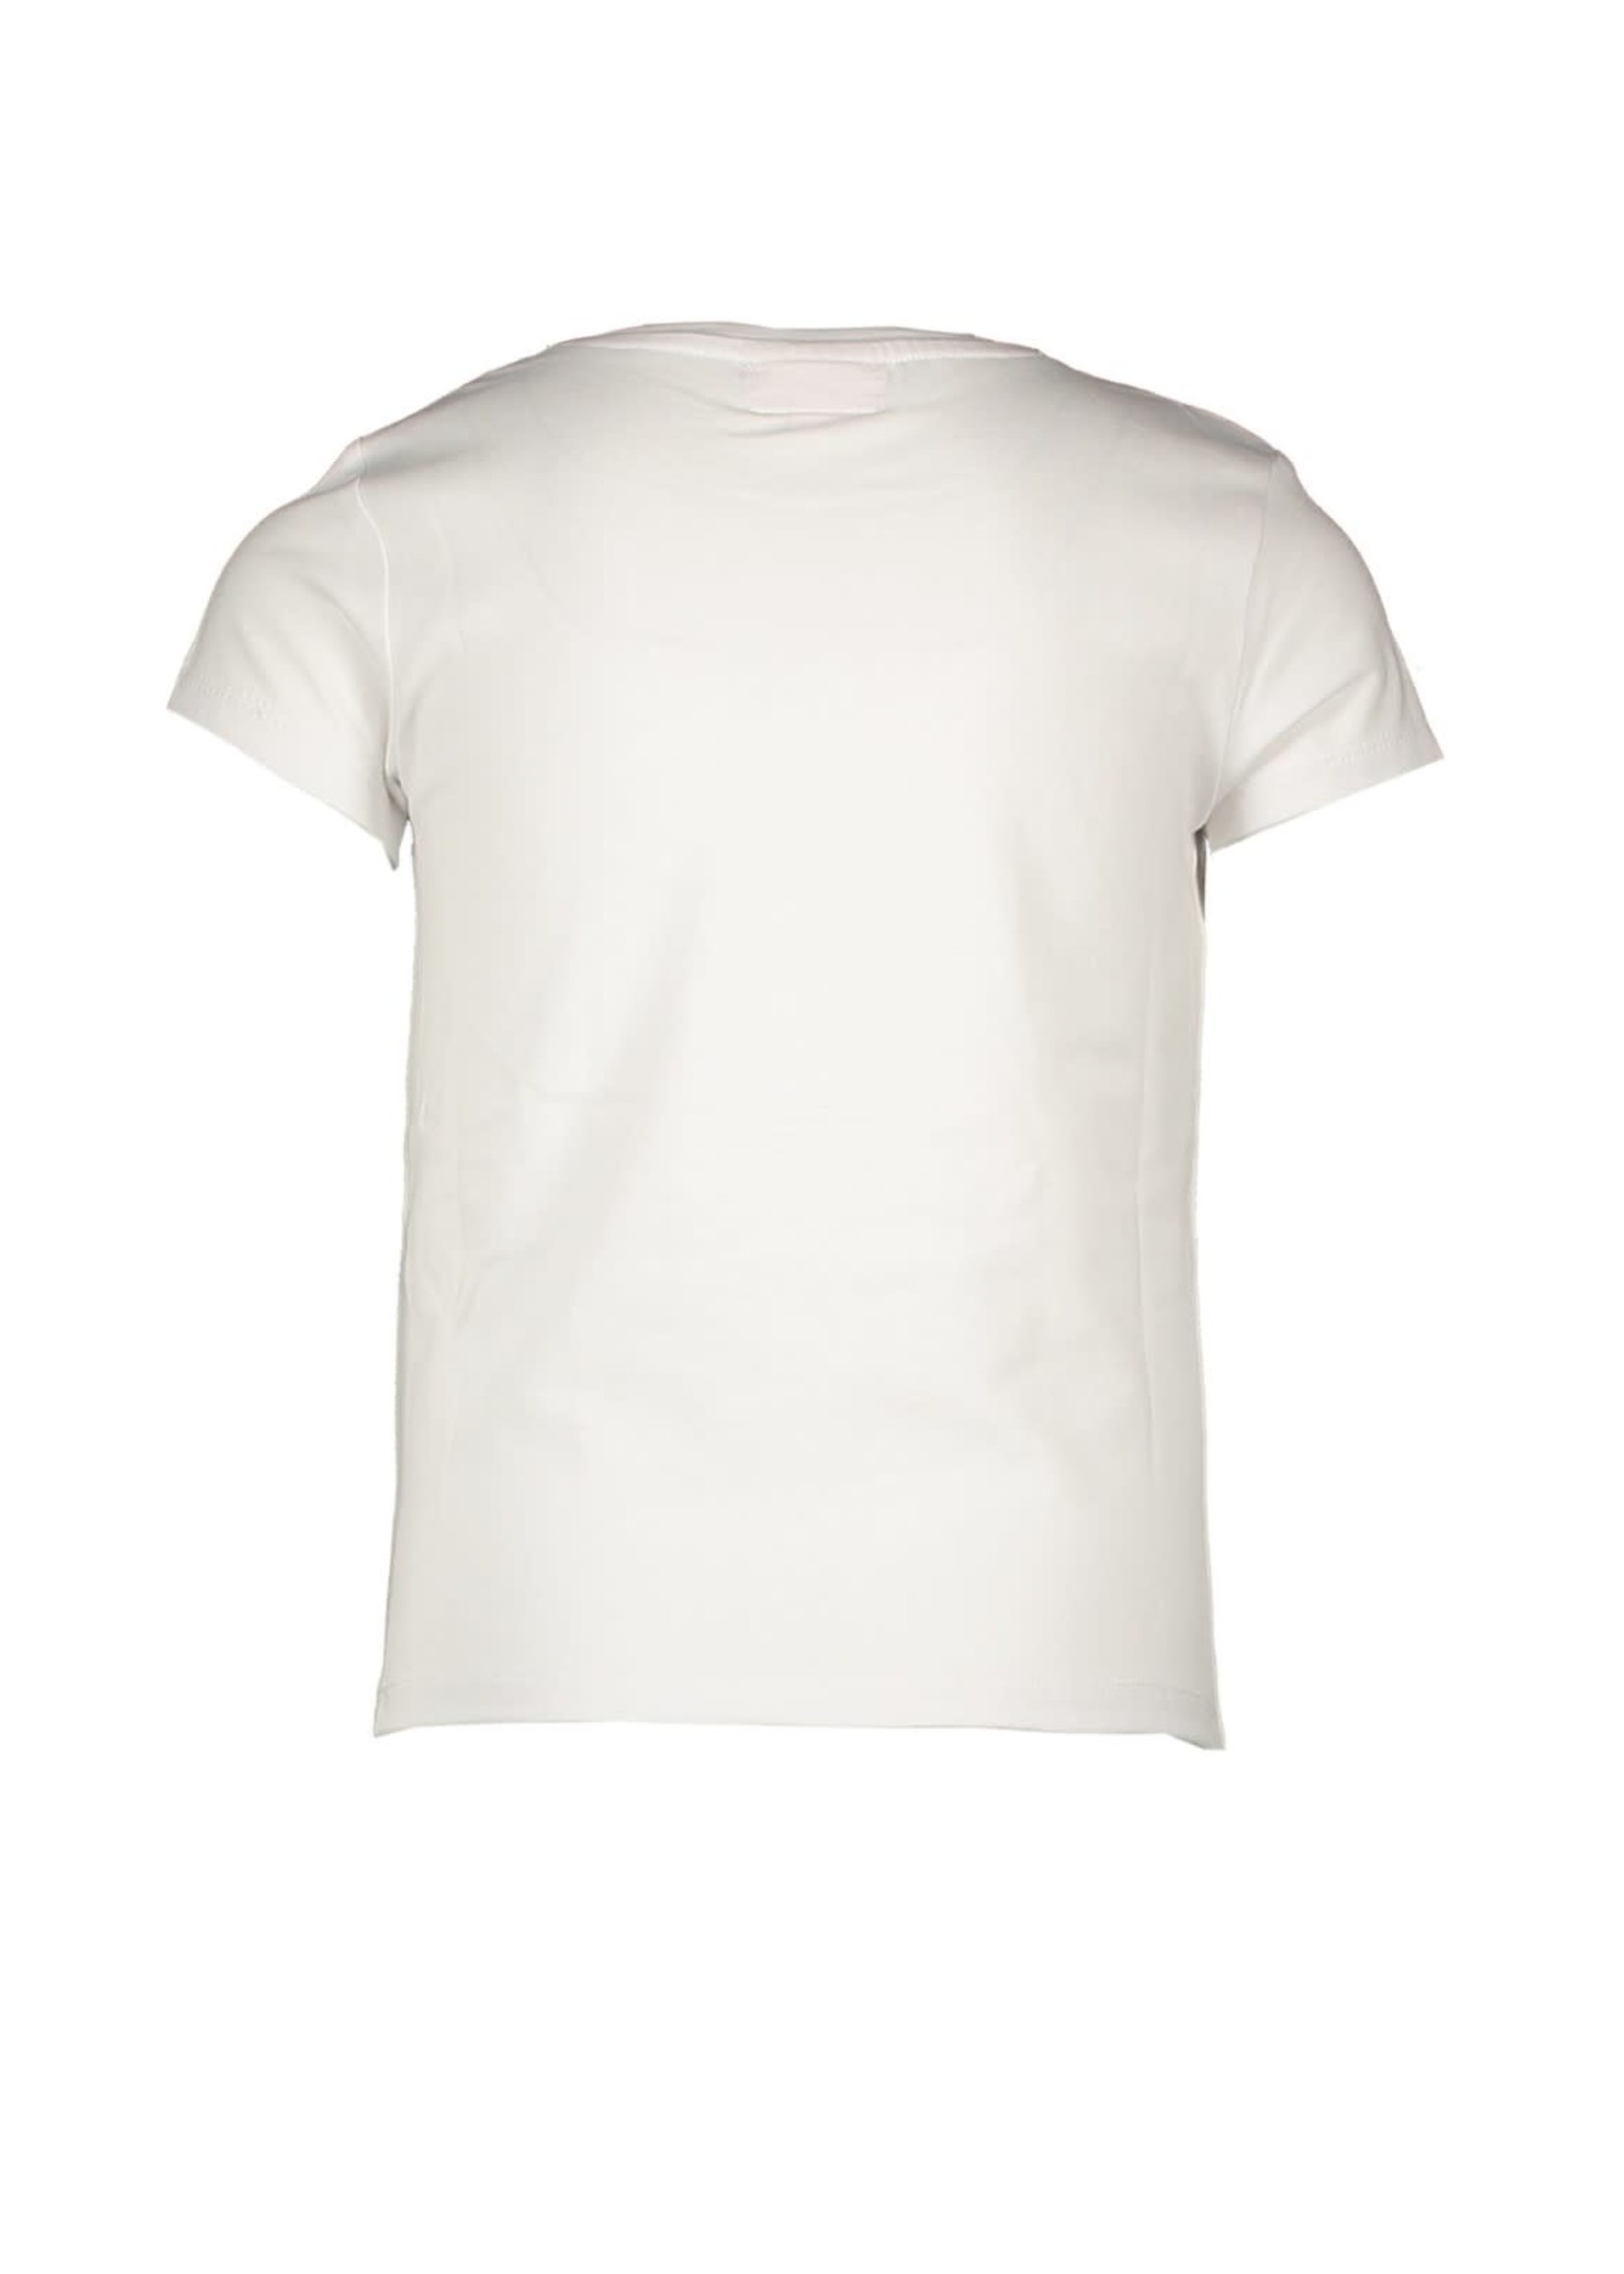 Le Chic Le Chic NORIKO beating heart T-shirt C112-5401 Off White